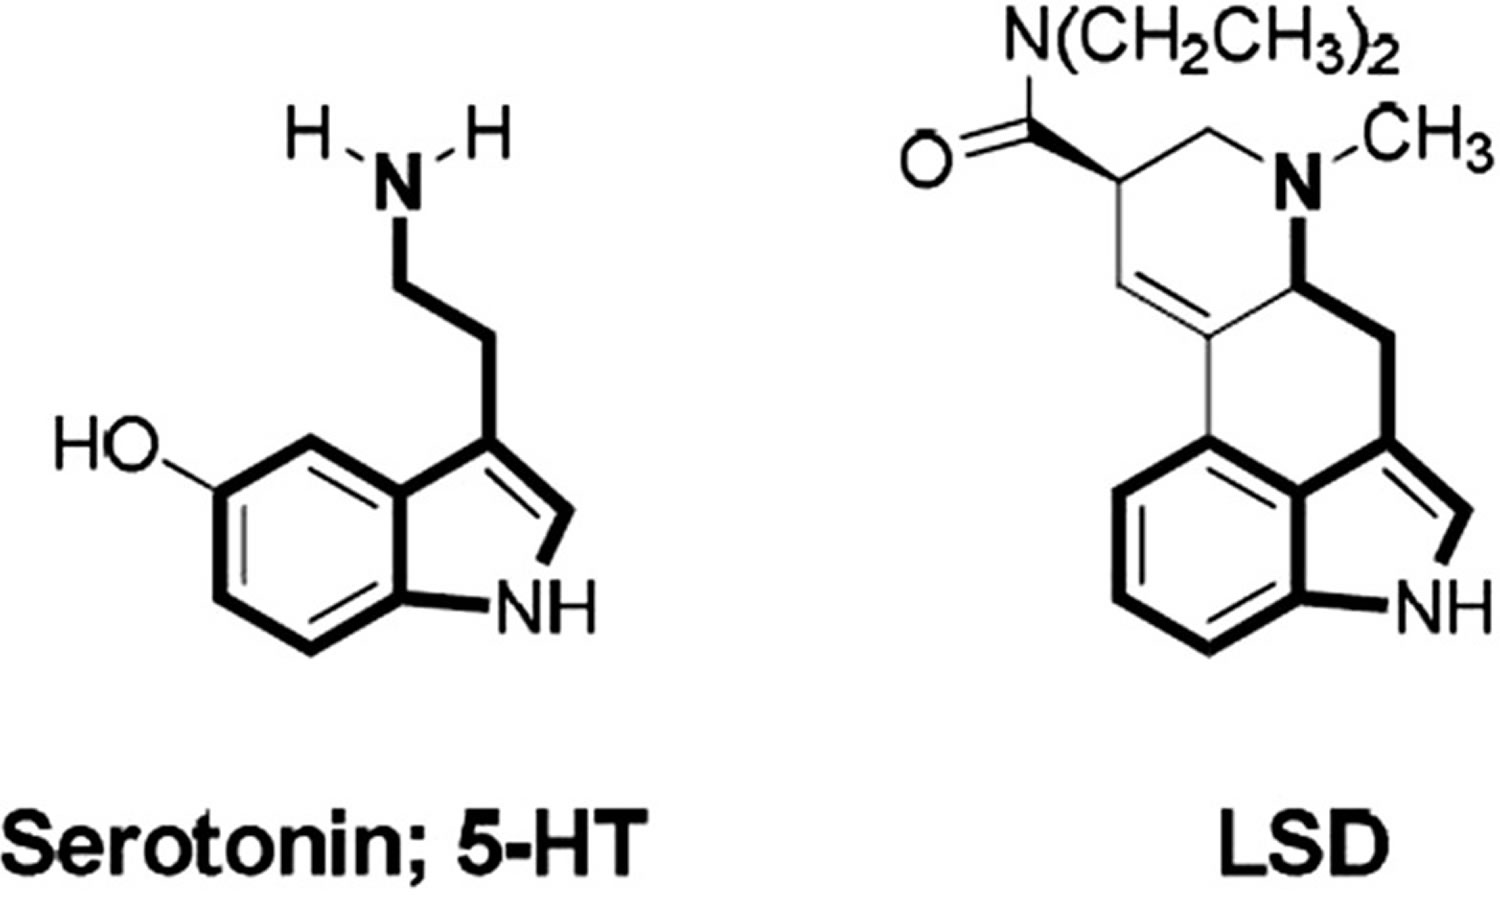 Chemical structures of serotonin and LSD